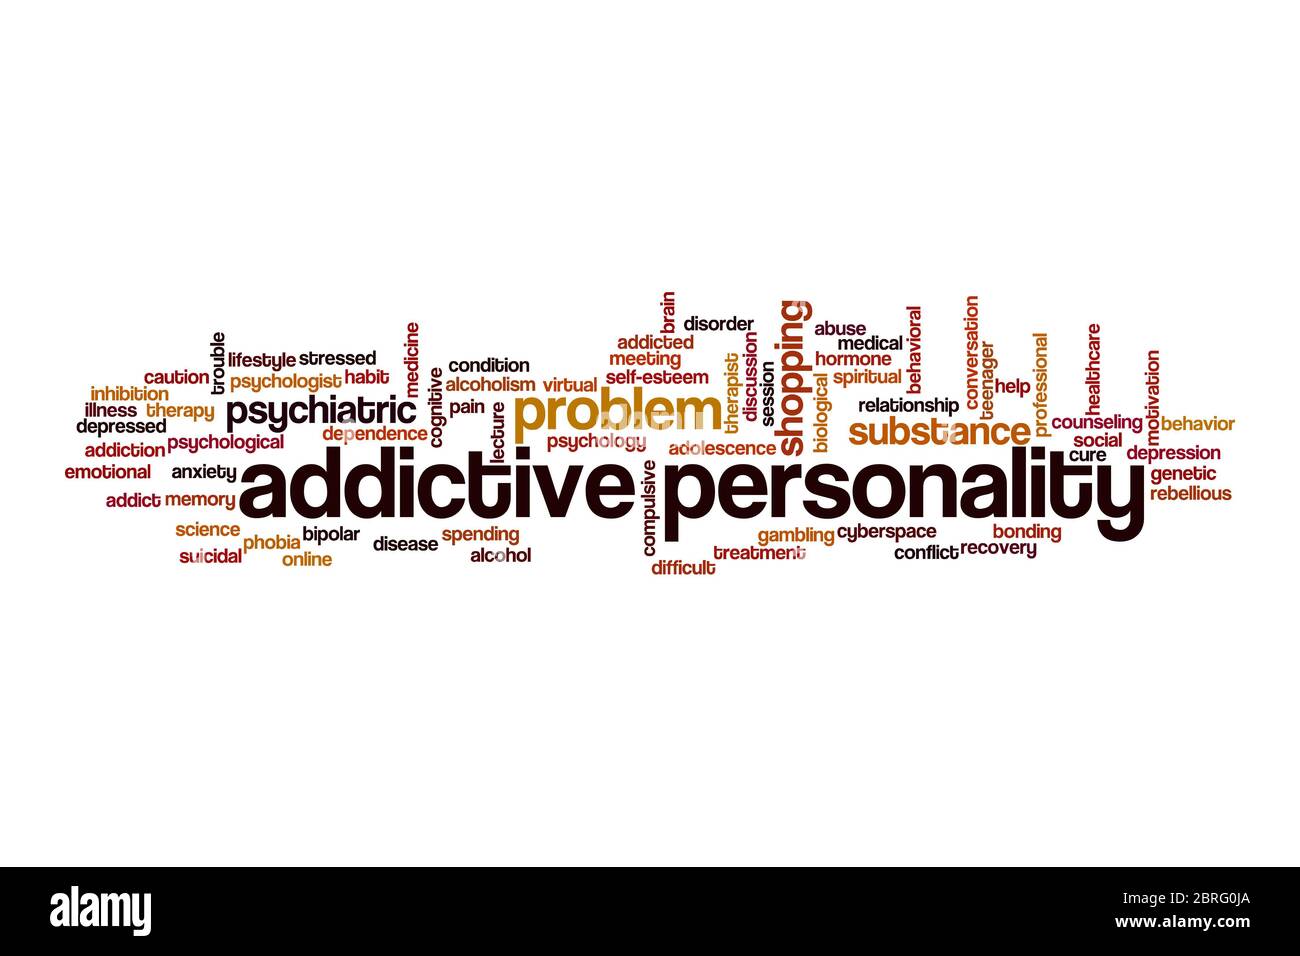 Addictive personality cloud concept on white background Stock Photo